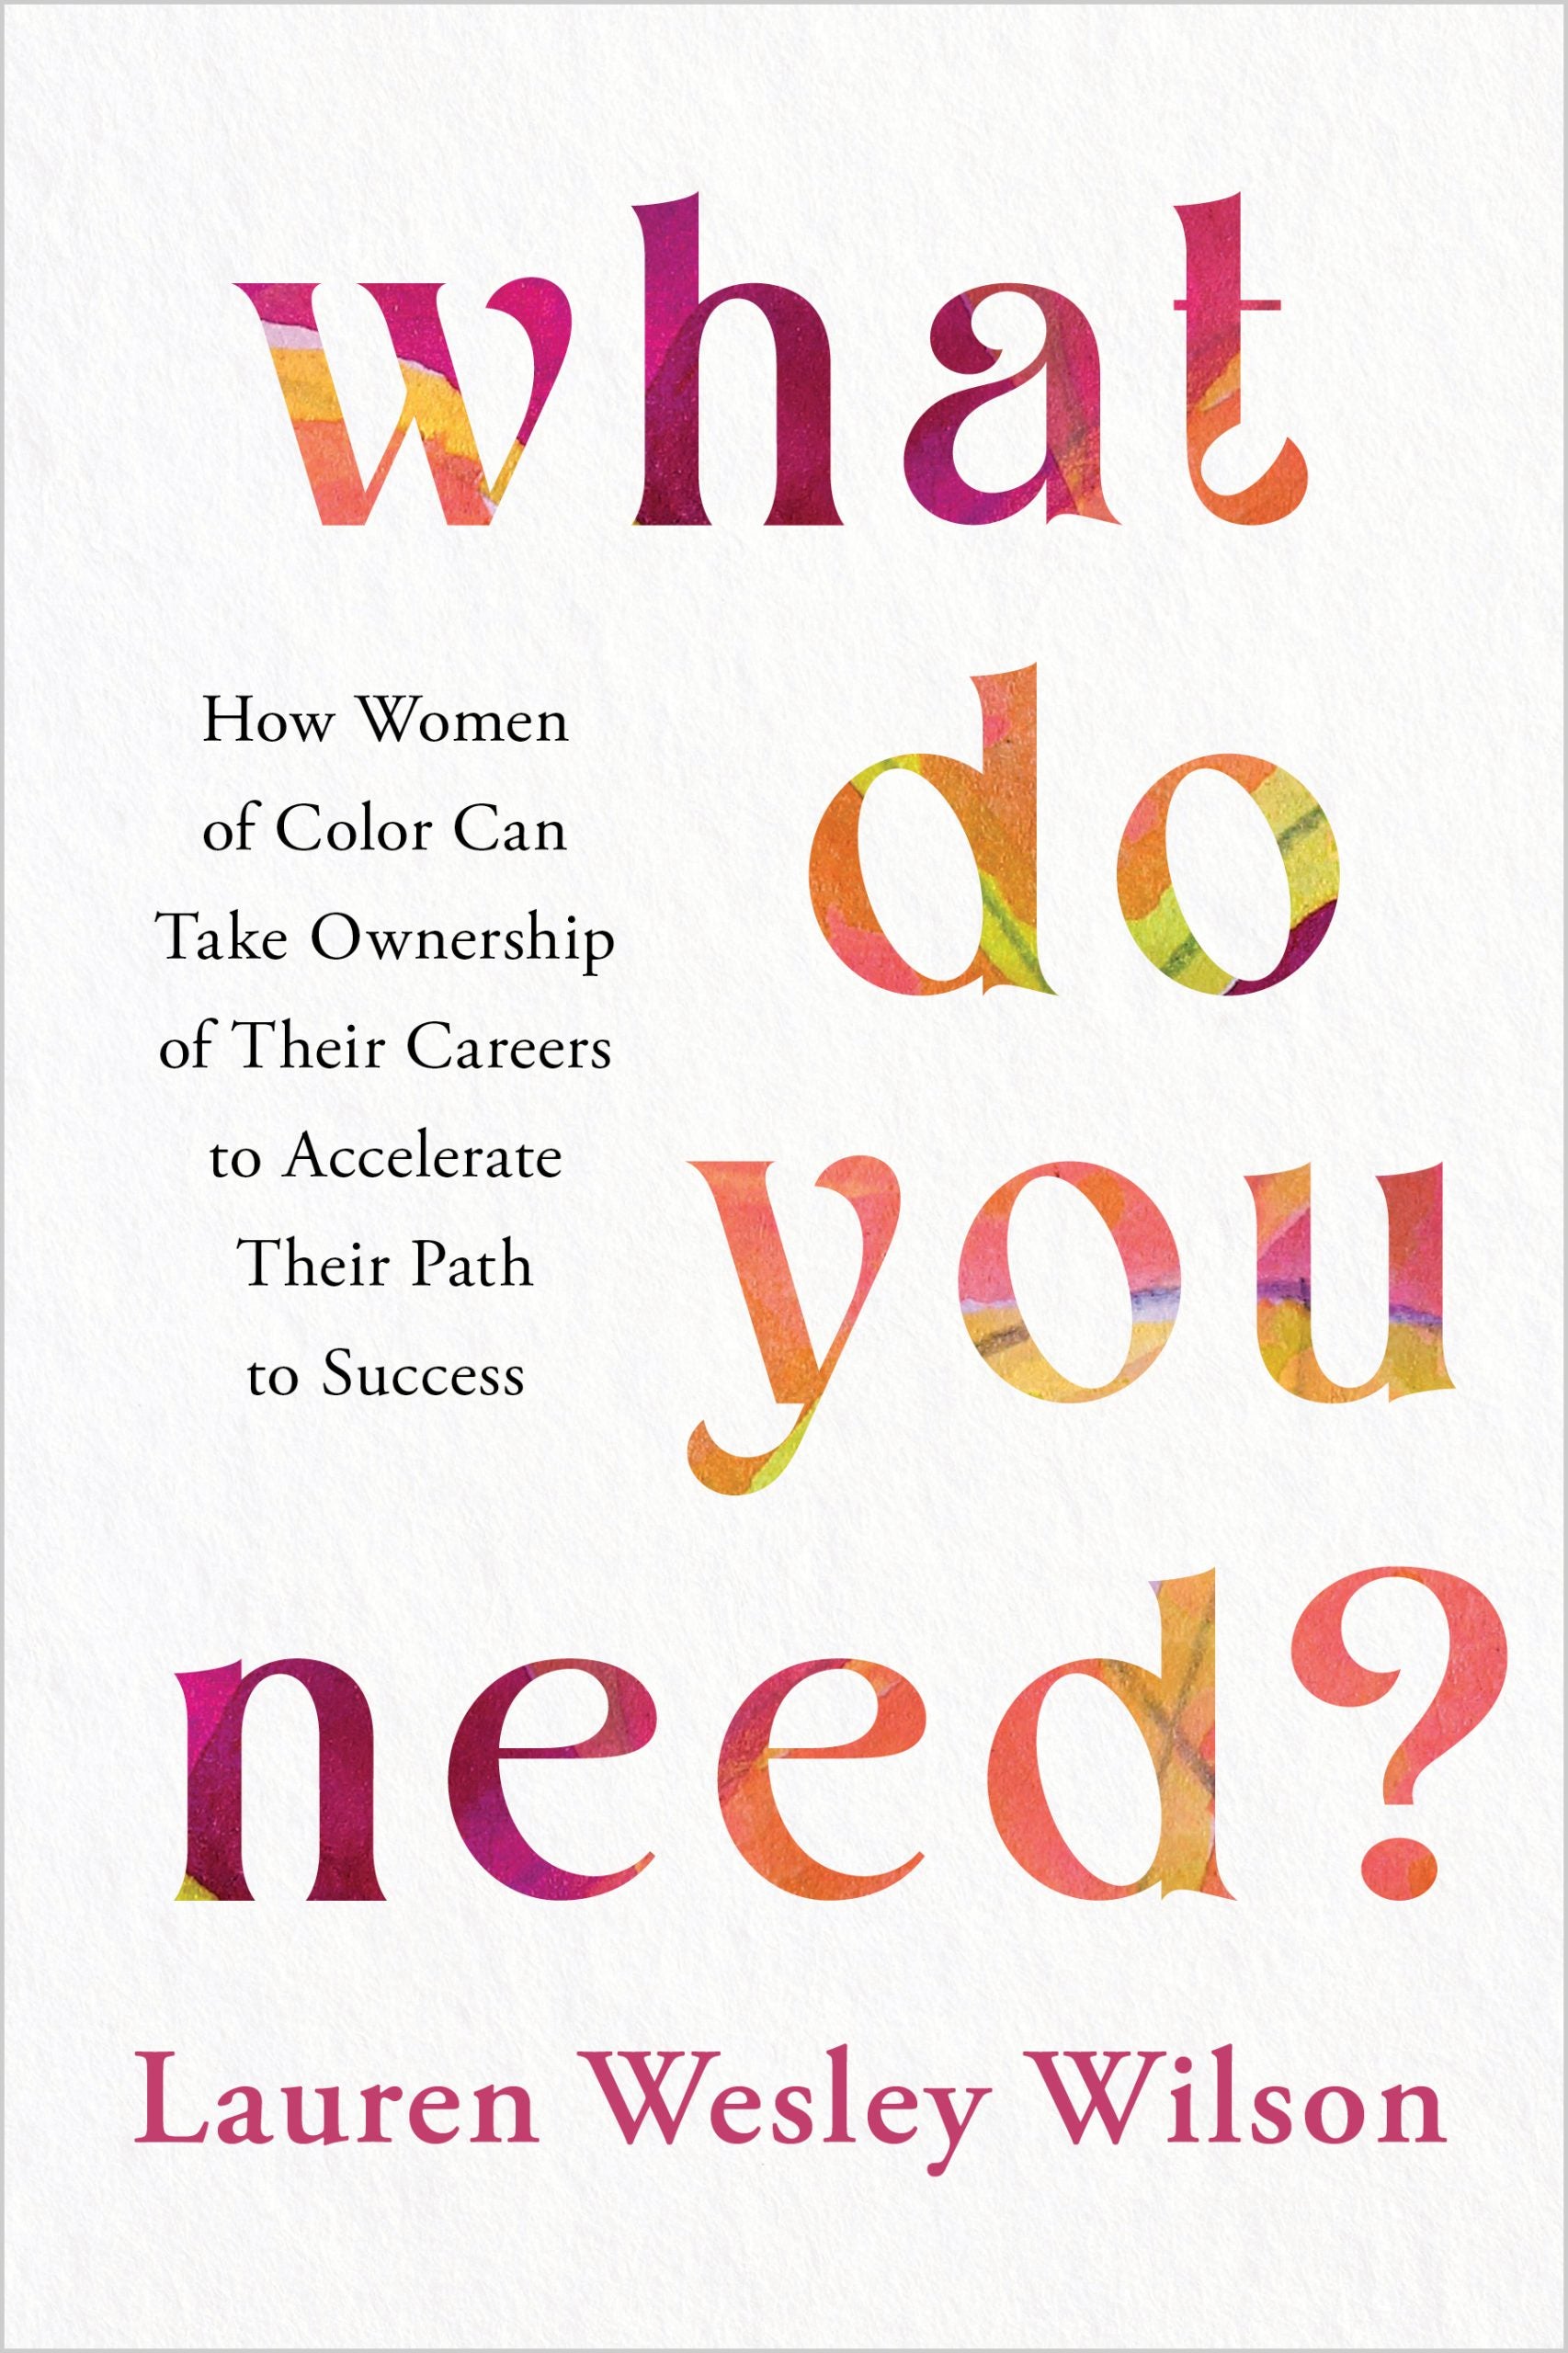 ColorComm Founder Lauren Wesley Wilson Pens Book “What Do You Need?” For Black Women Who Deserve A Leg Up